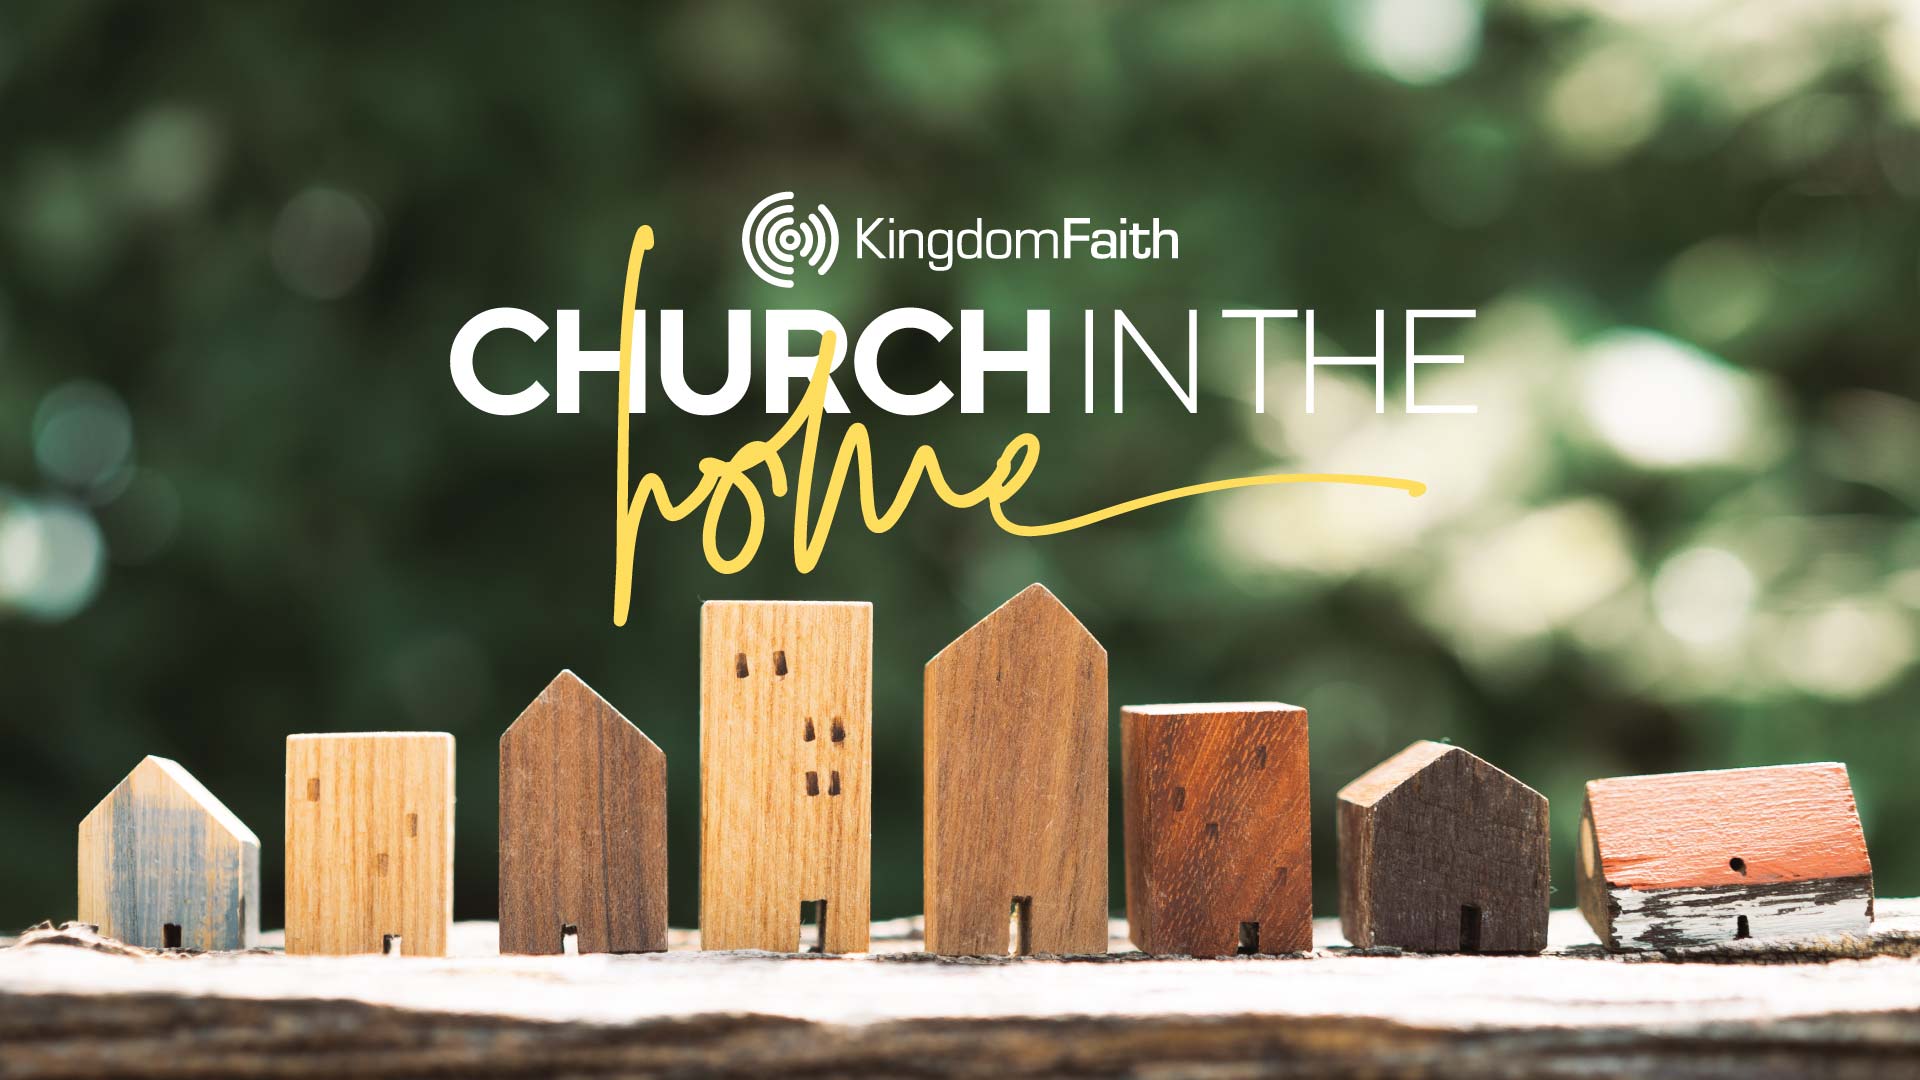 Church in the home - Sunday 02 Apr